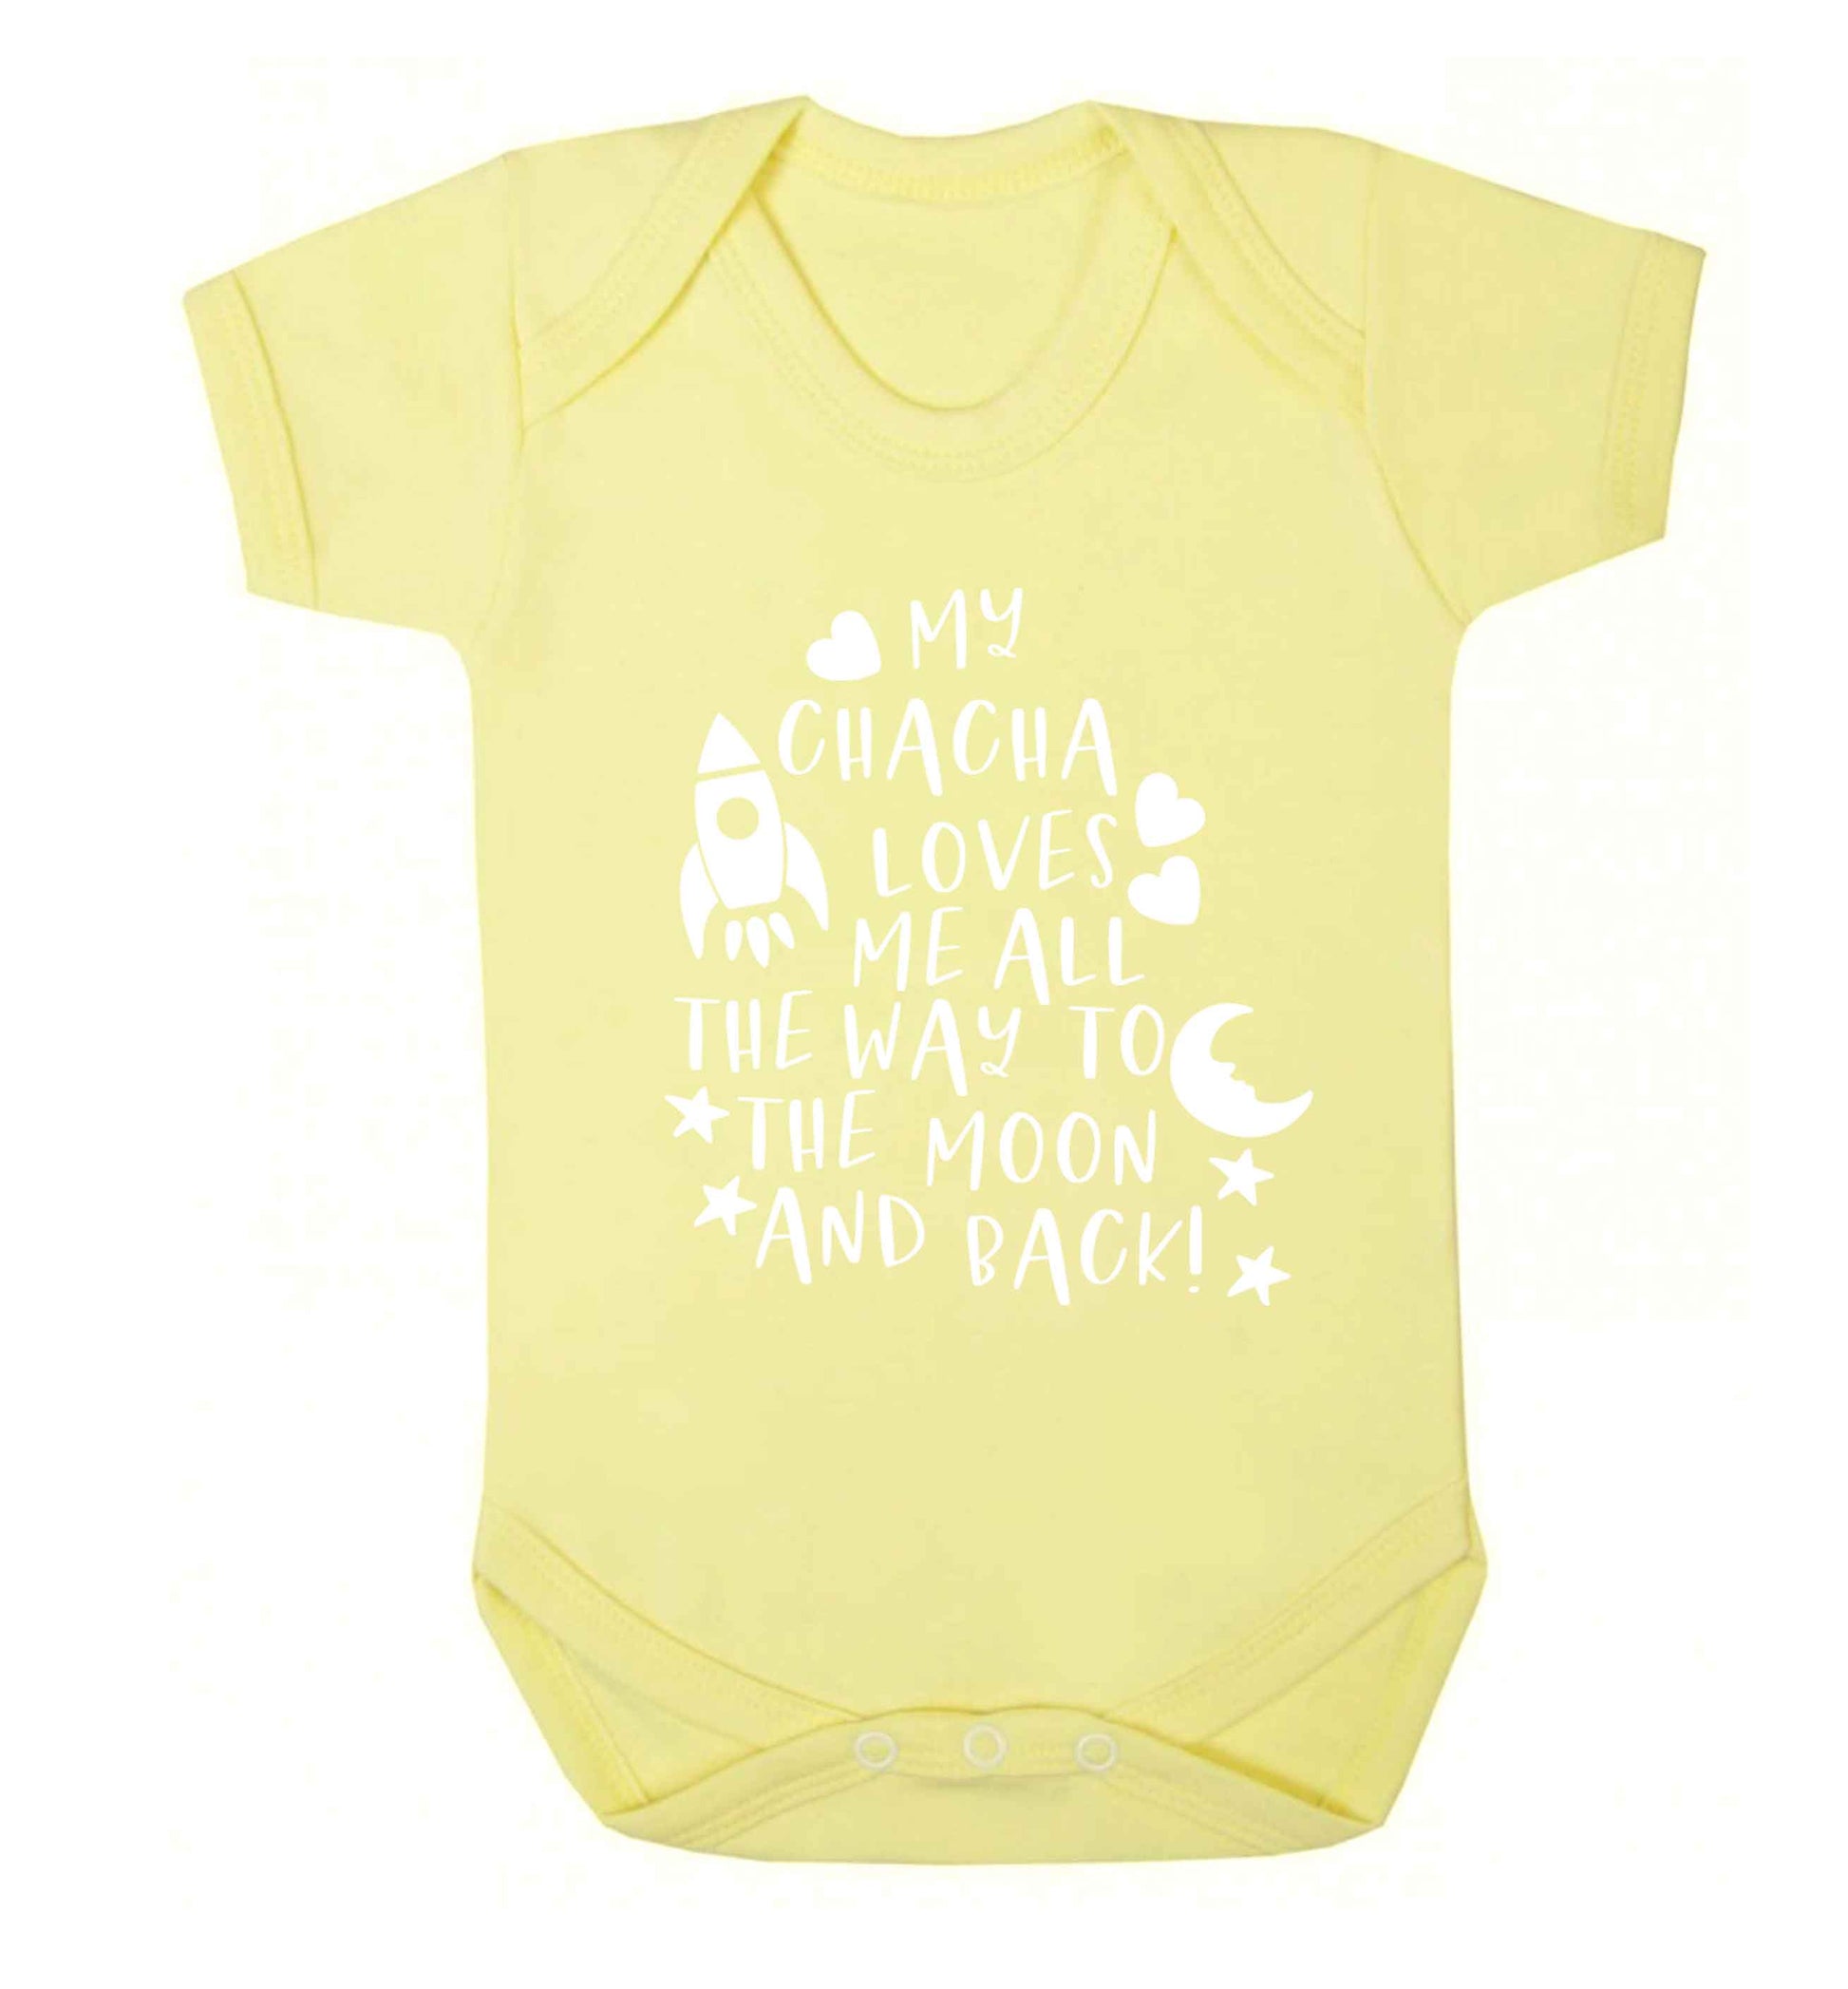 My chacha loves me all the way to the moon and back Baby Vest pale yellow 18-24 months